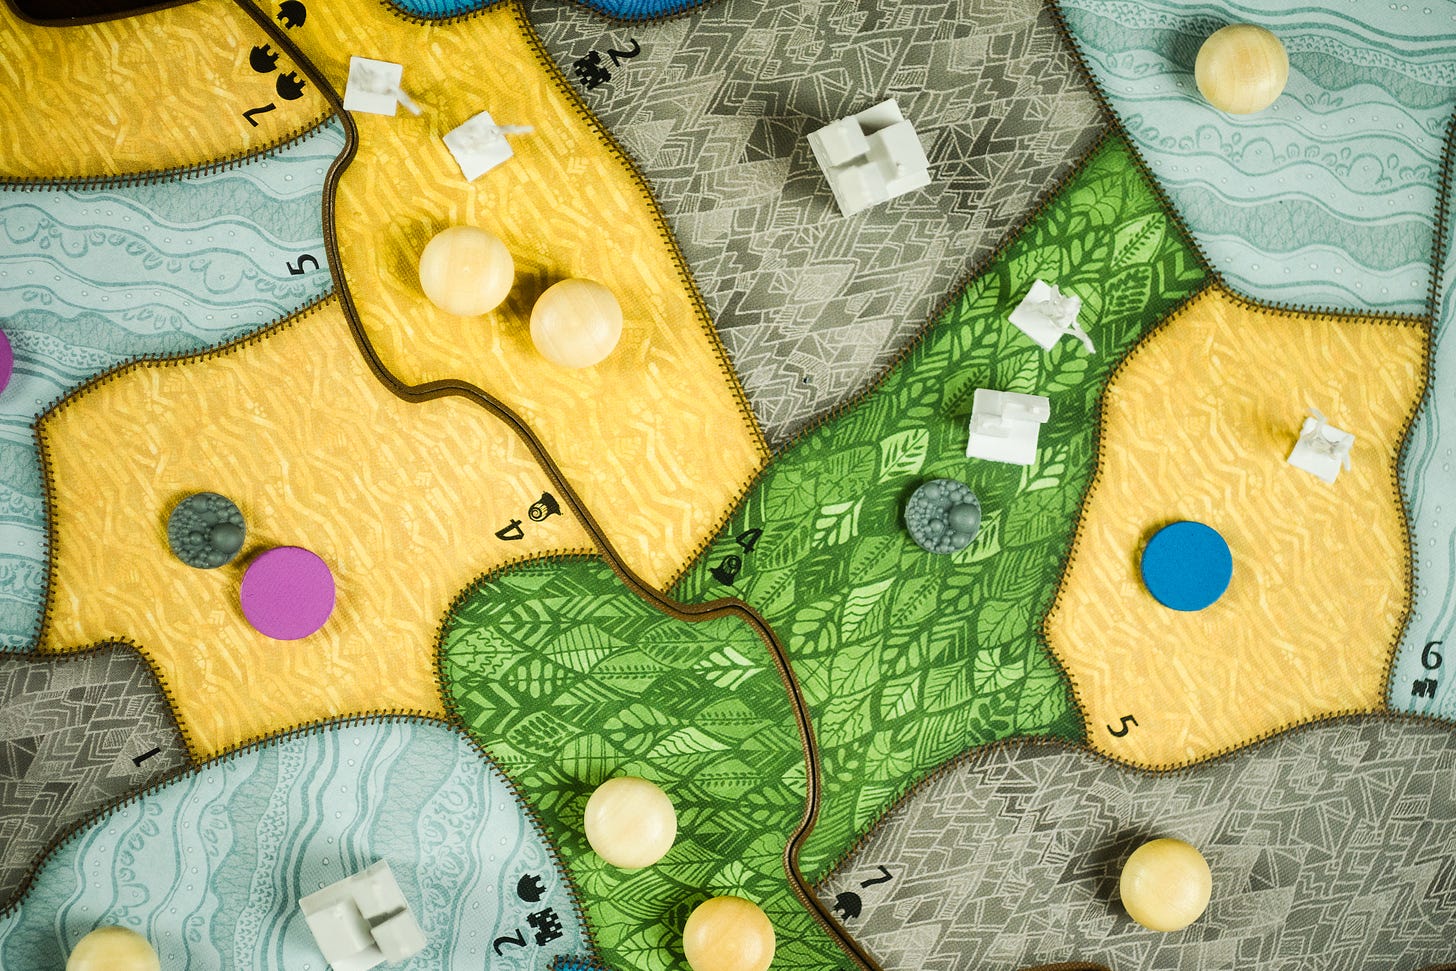 The board game Spirit Island. There are invader figures in multiple desert tiles, and cities are present in several places on the board.